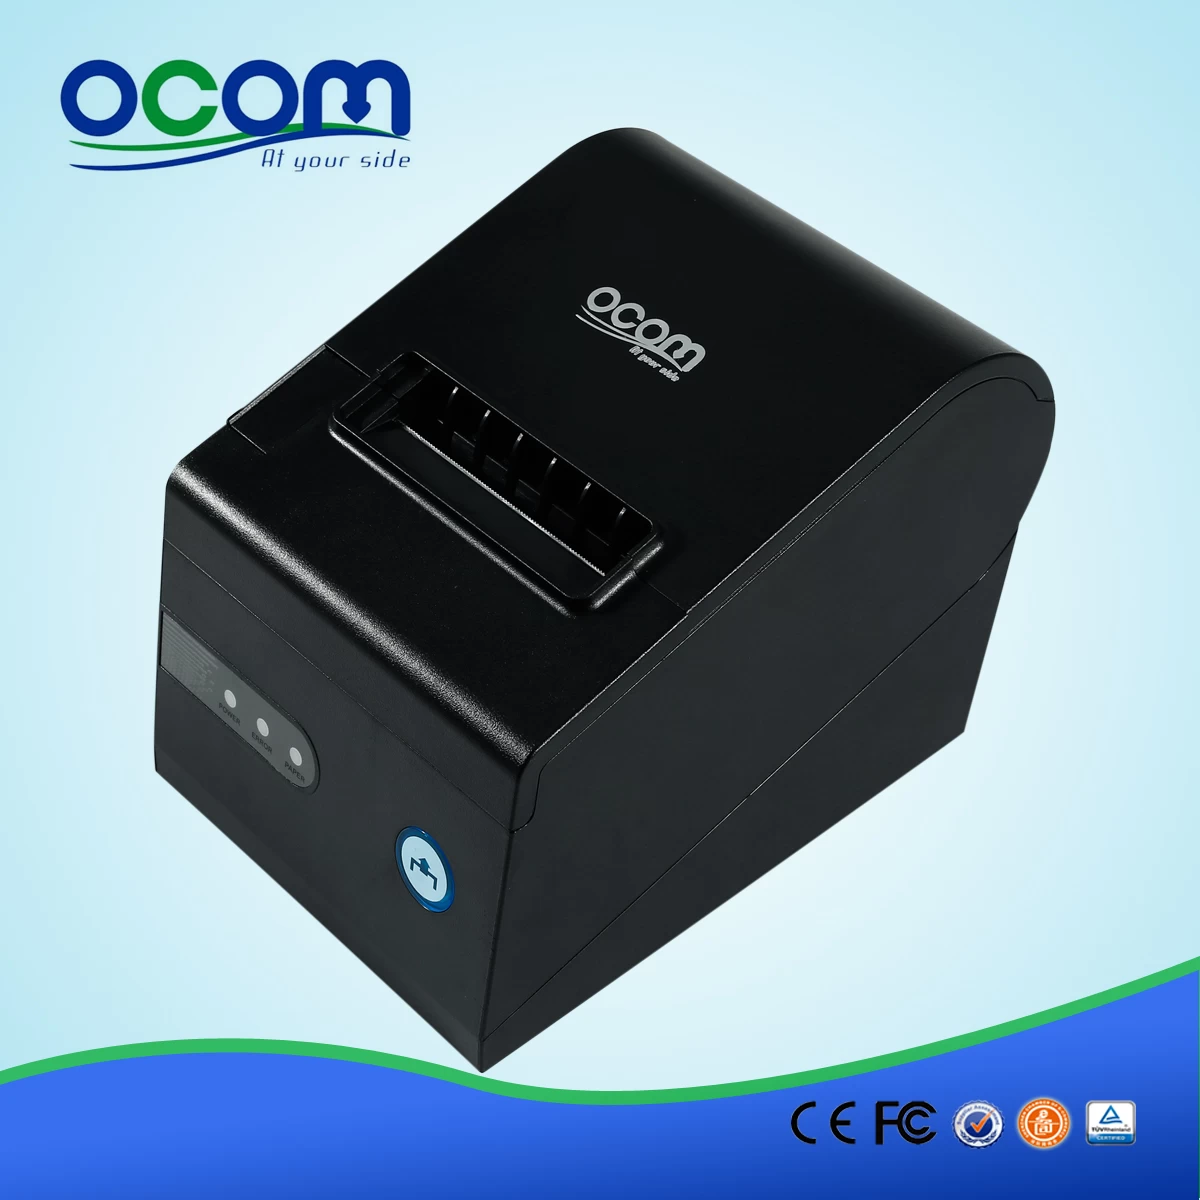 OCPP-804URL 80mm thermal bill printer with Auto cutter